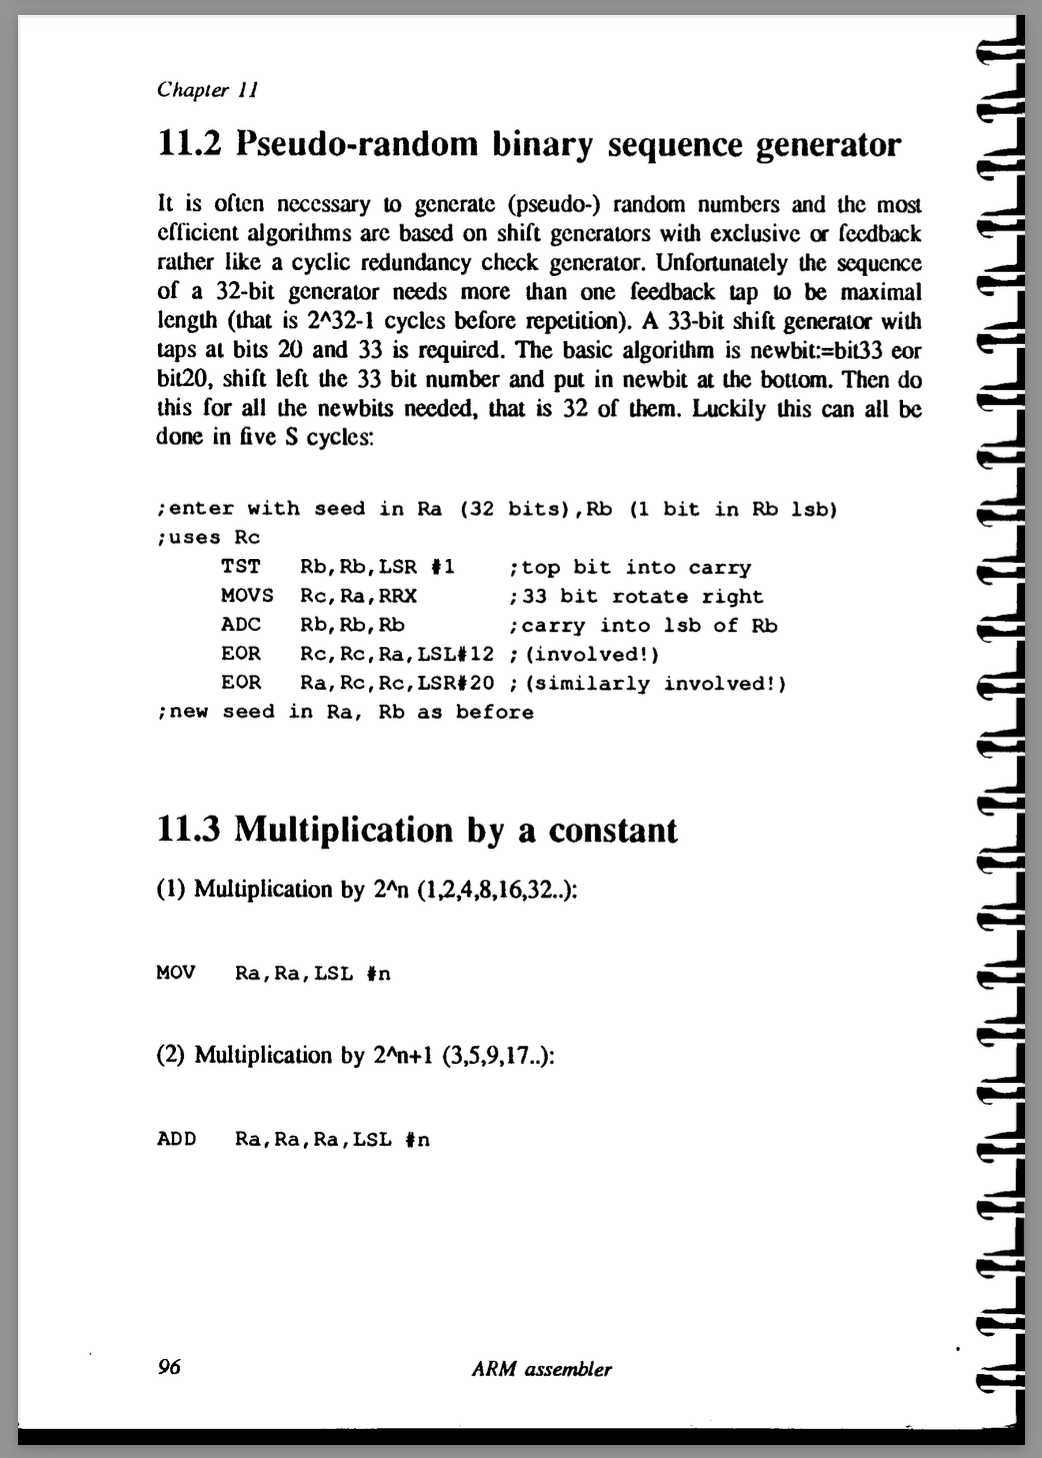 The random number routine from the ARM Assembler manual that came with Acorn's ARM Evaluation System